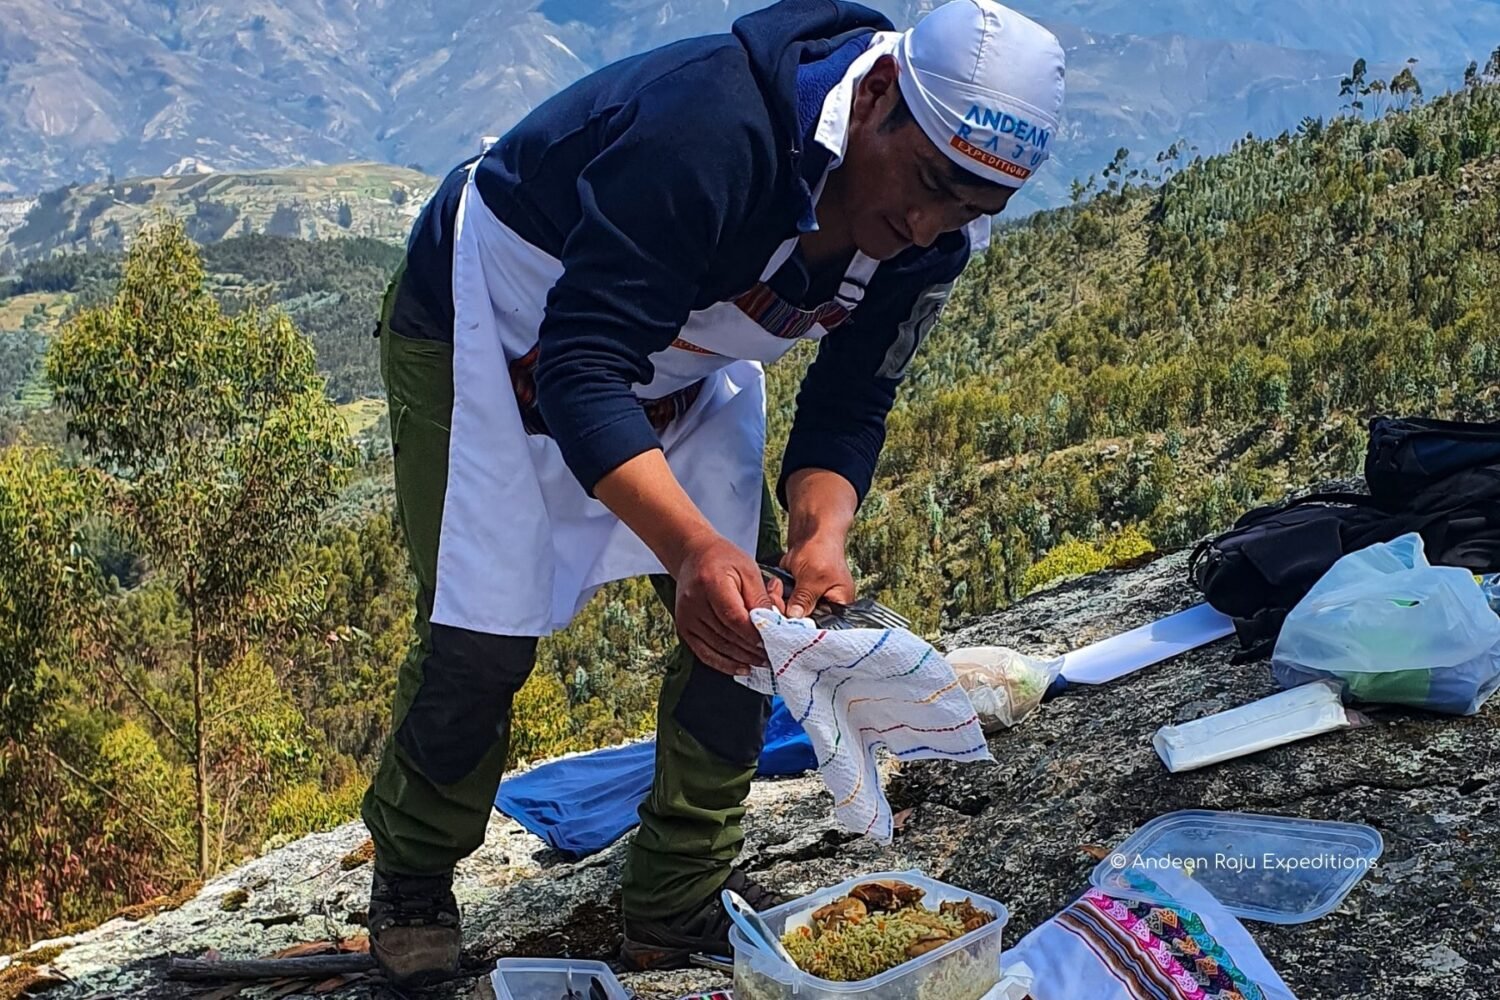 Our Chef Juvenal providing lunch for our group